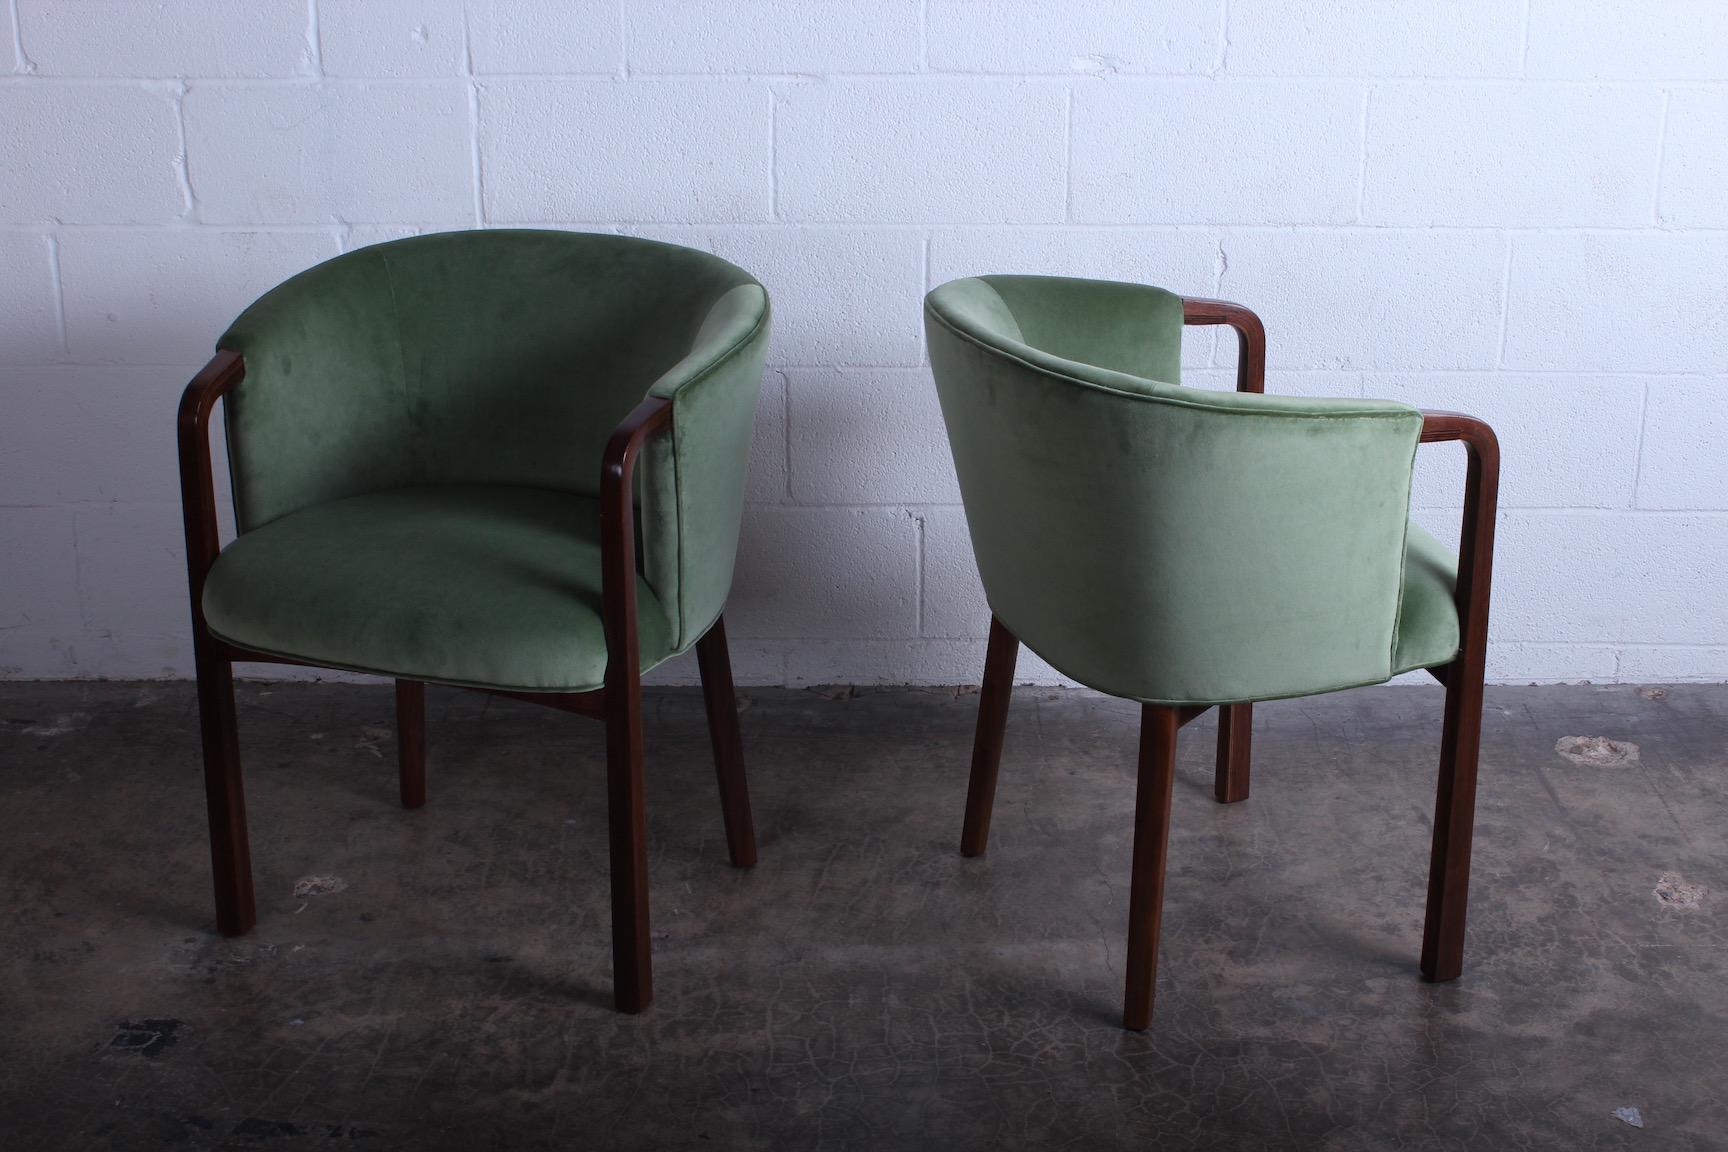 A set of four armchairs/dining chairs by Edward Wormley for Dunbar. Restored walnut frames with new velvet upholstery.